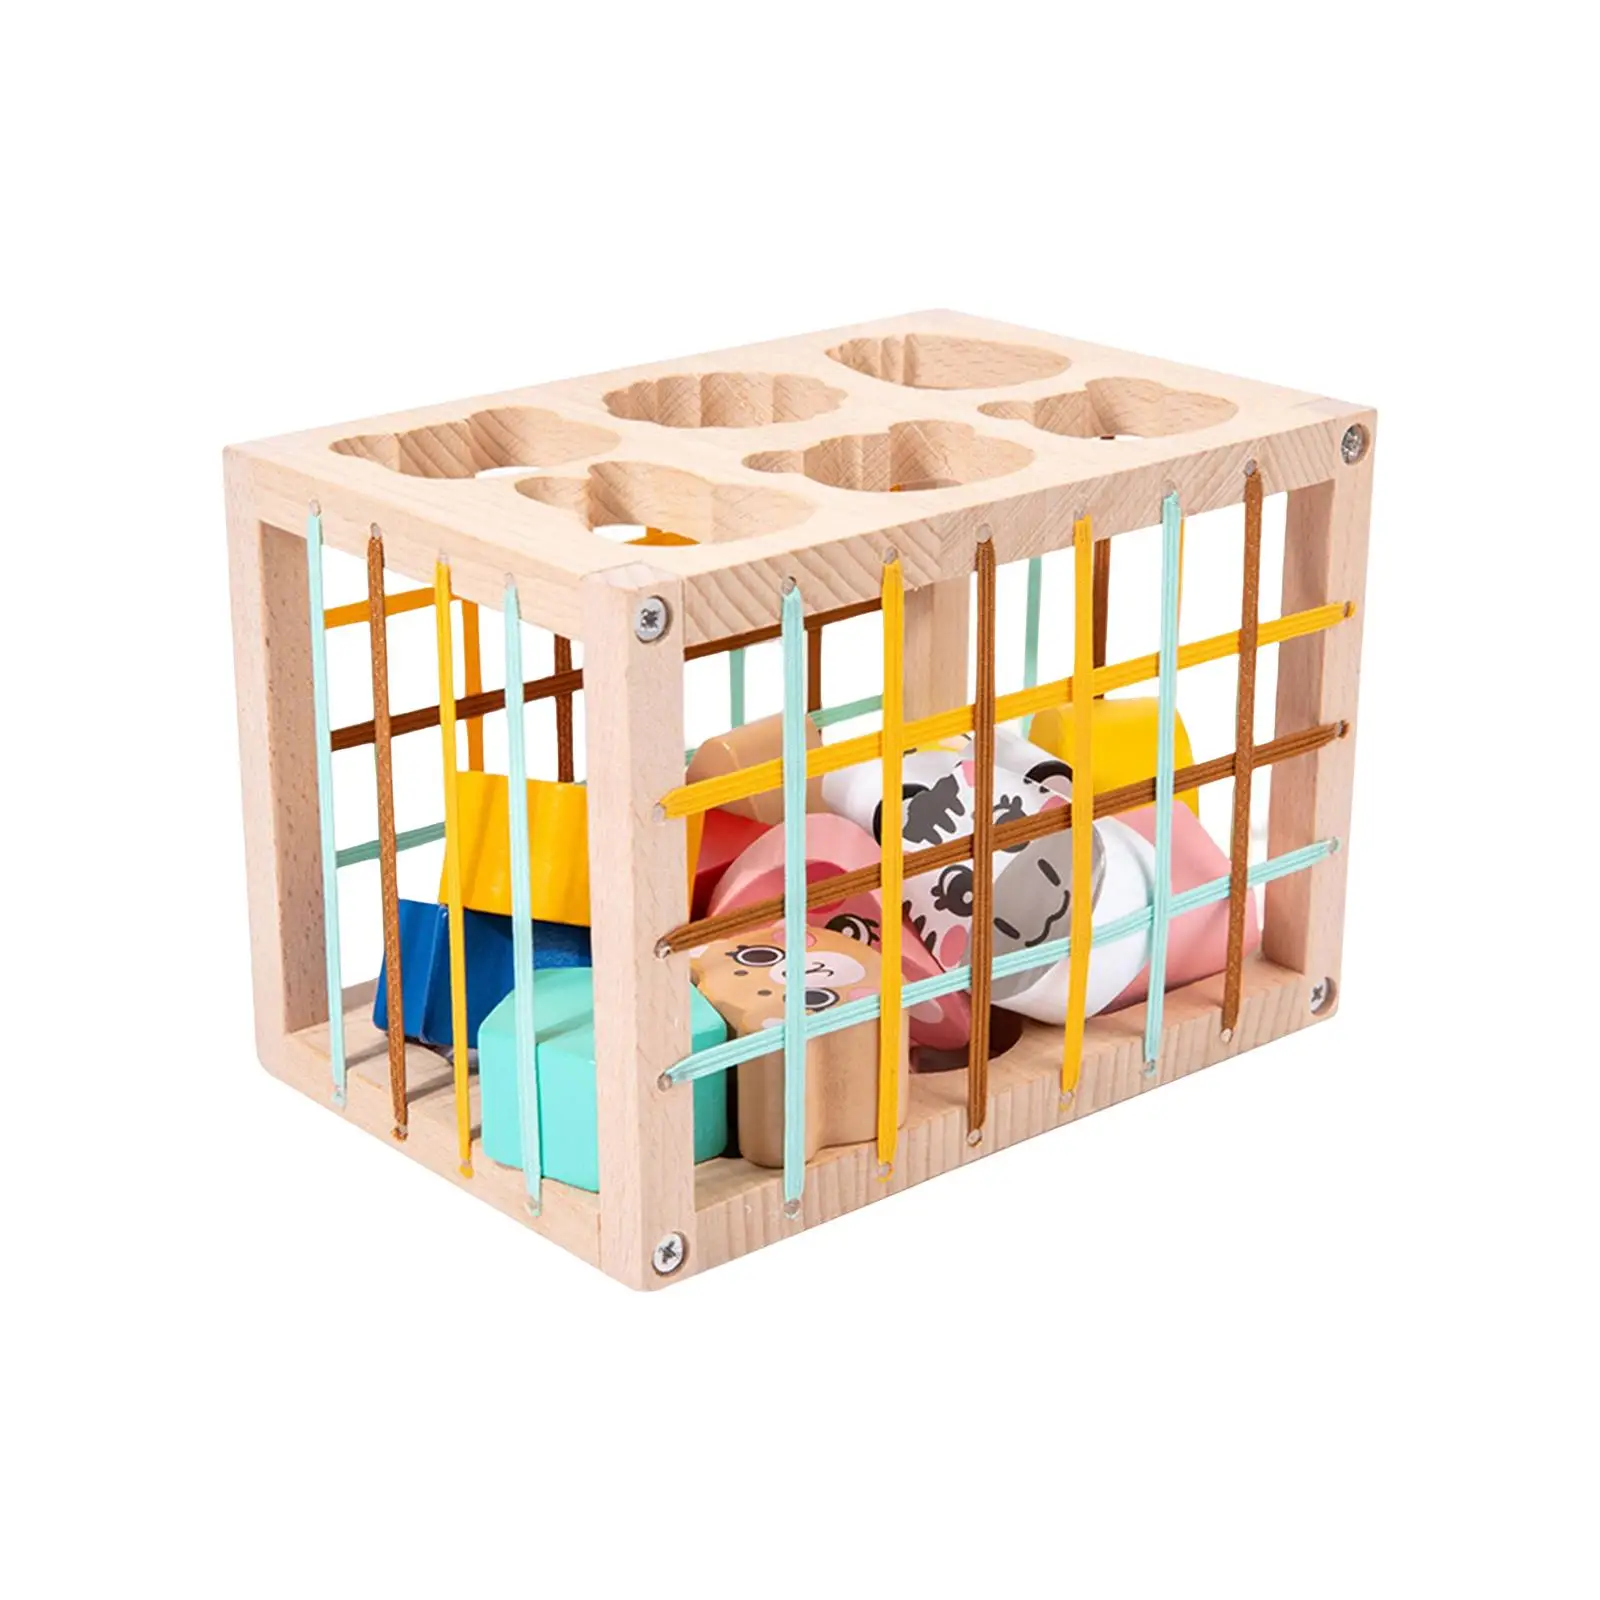 Montessori Shape Sorter Toy Matching Fine Motor Skills Color Recognition Educational Toy Puzzle Toy for Toddlers Children Kids